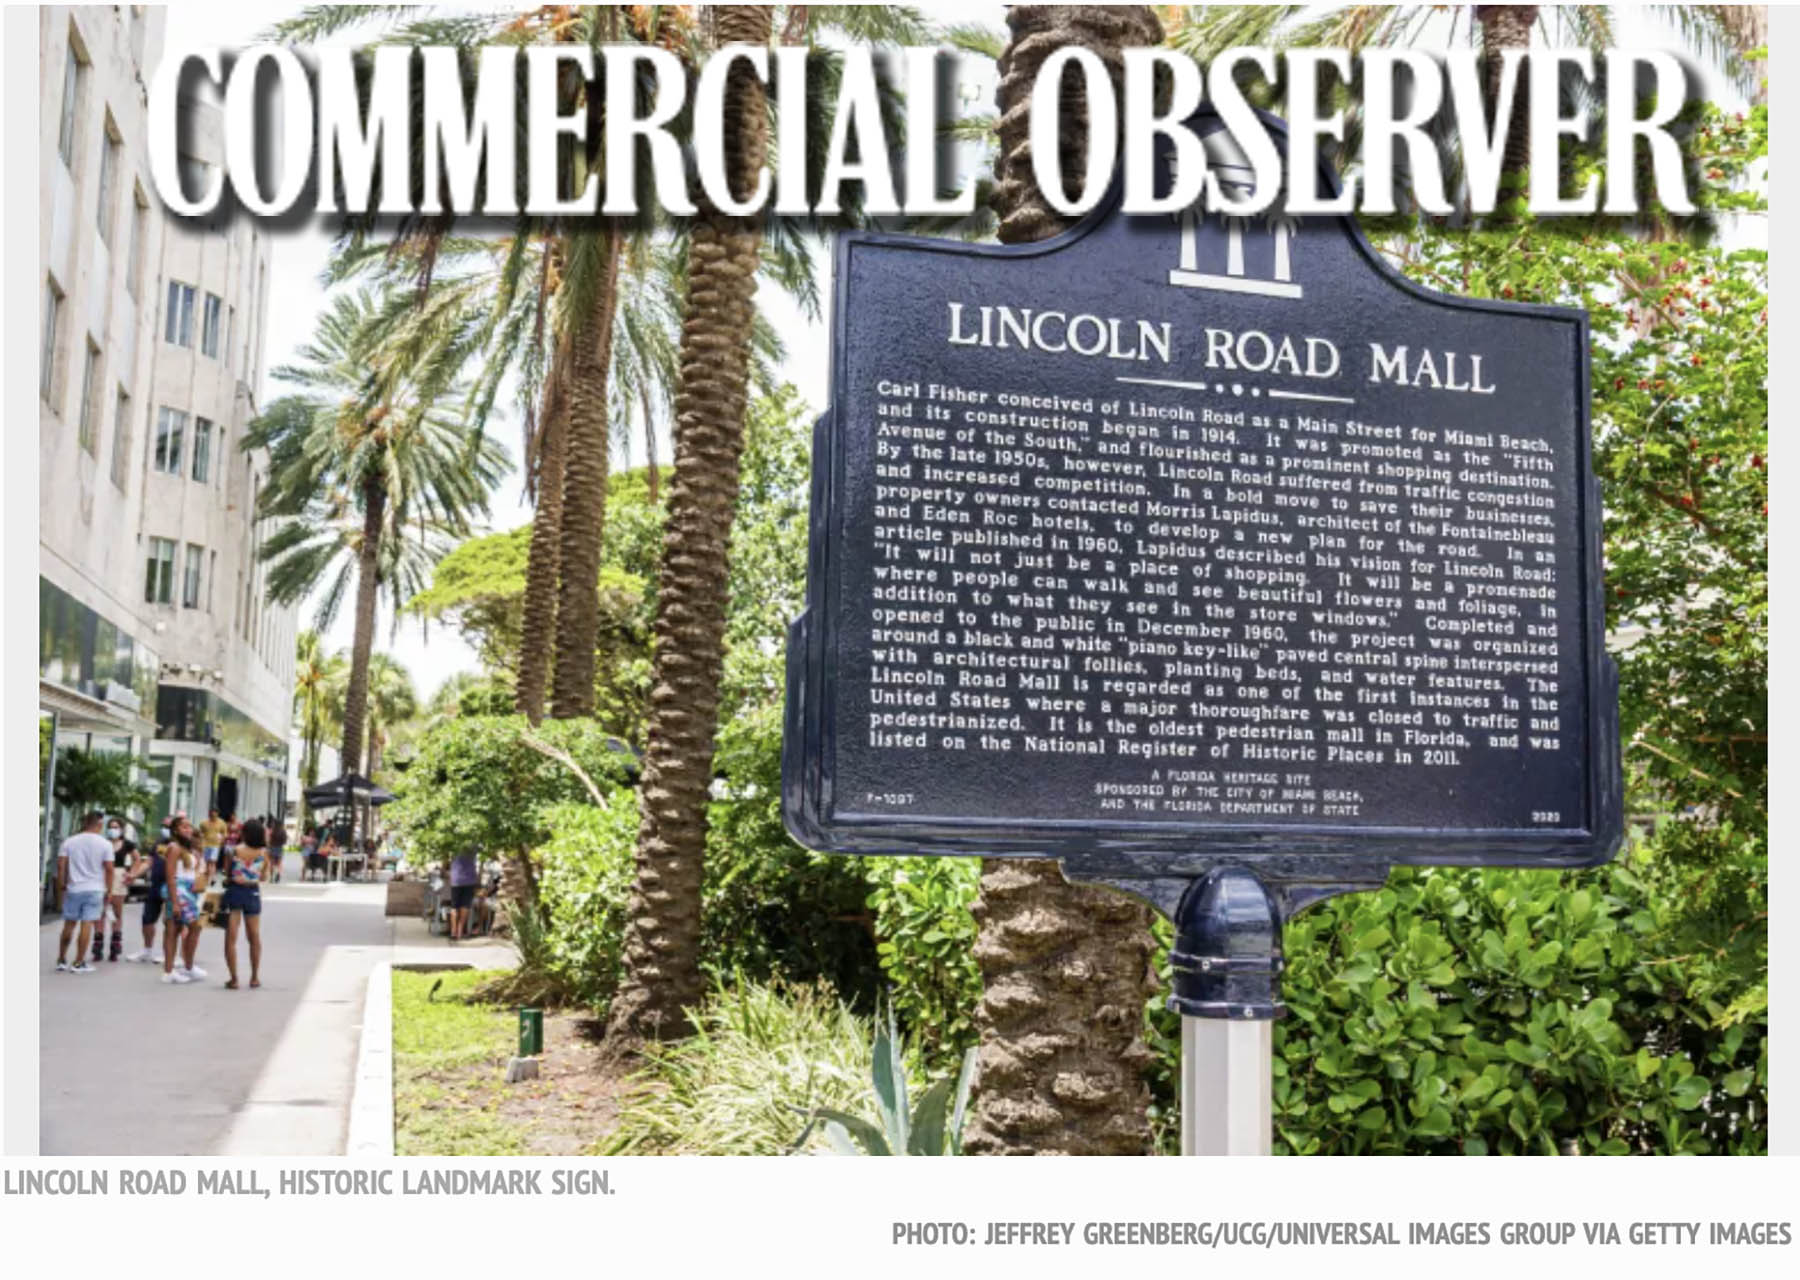 Commercial Observer – The Secret to Lincoln Road’s Success